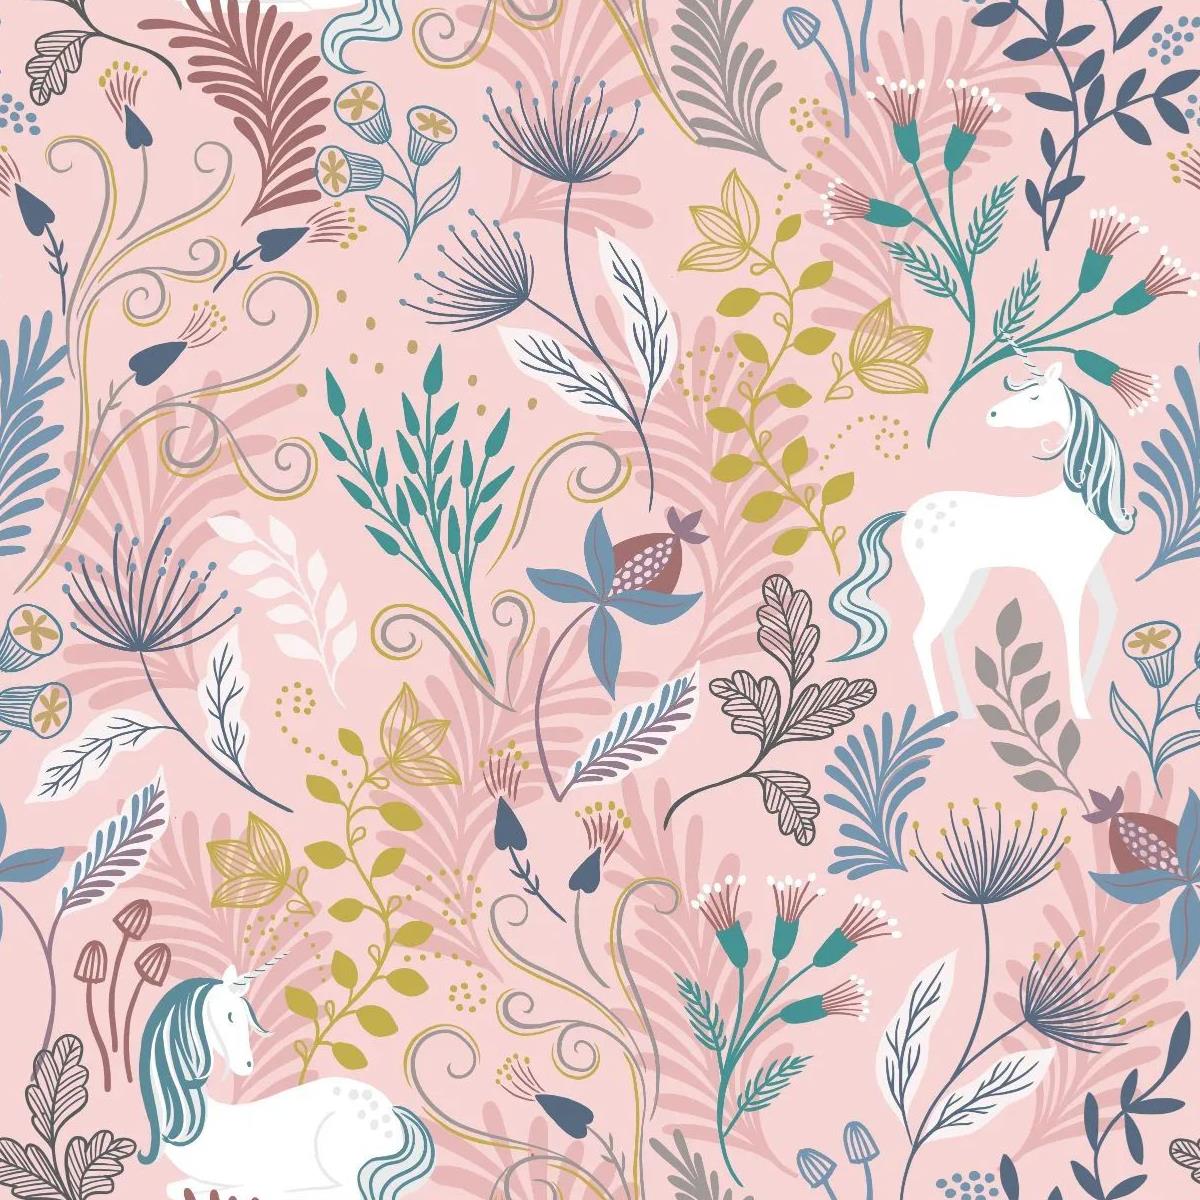 /images/product-images/2020images/FashionFabric/CraftCotton/LINov21/A543.1-Unicorn-on-Pink-with-Gold-Metallic.jpg